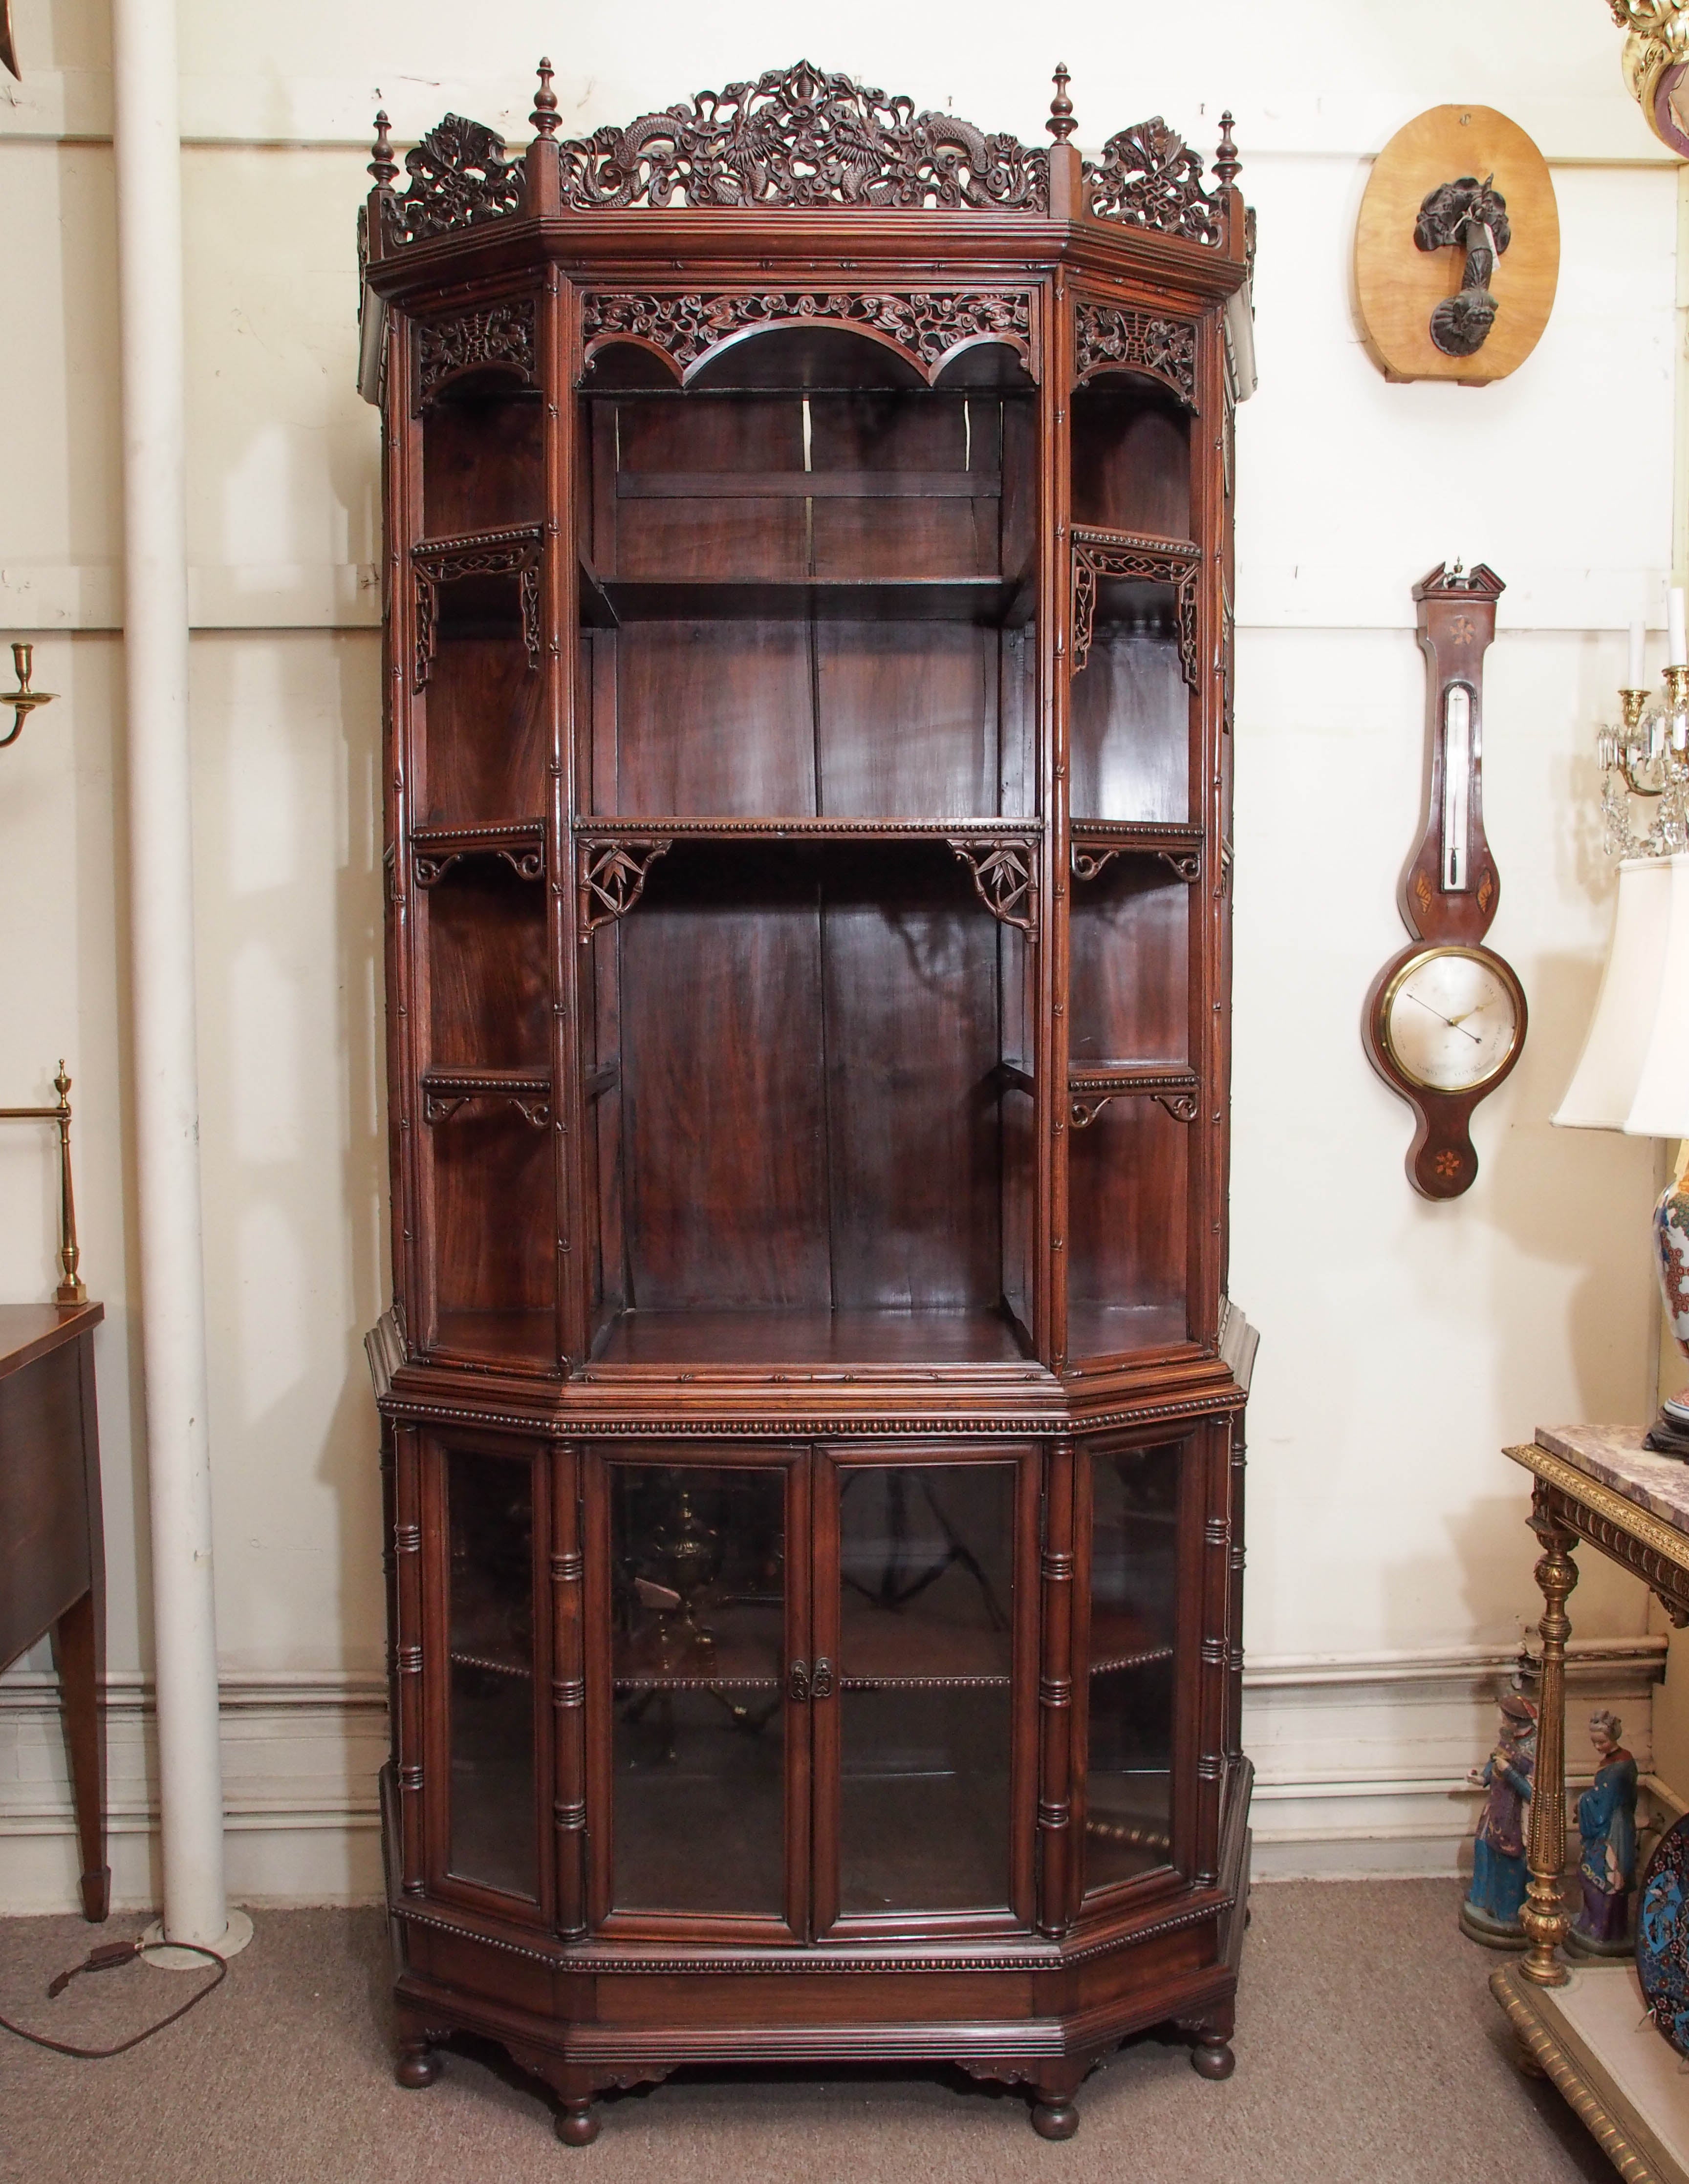 Magnificent antique carved teak cabinet, circa 1870-1880. This cabinet was purchased in England.